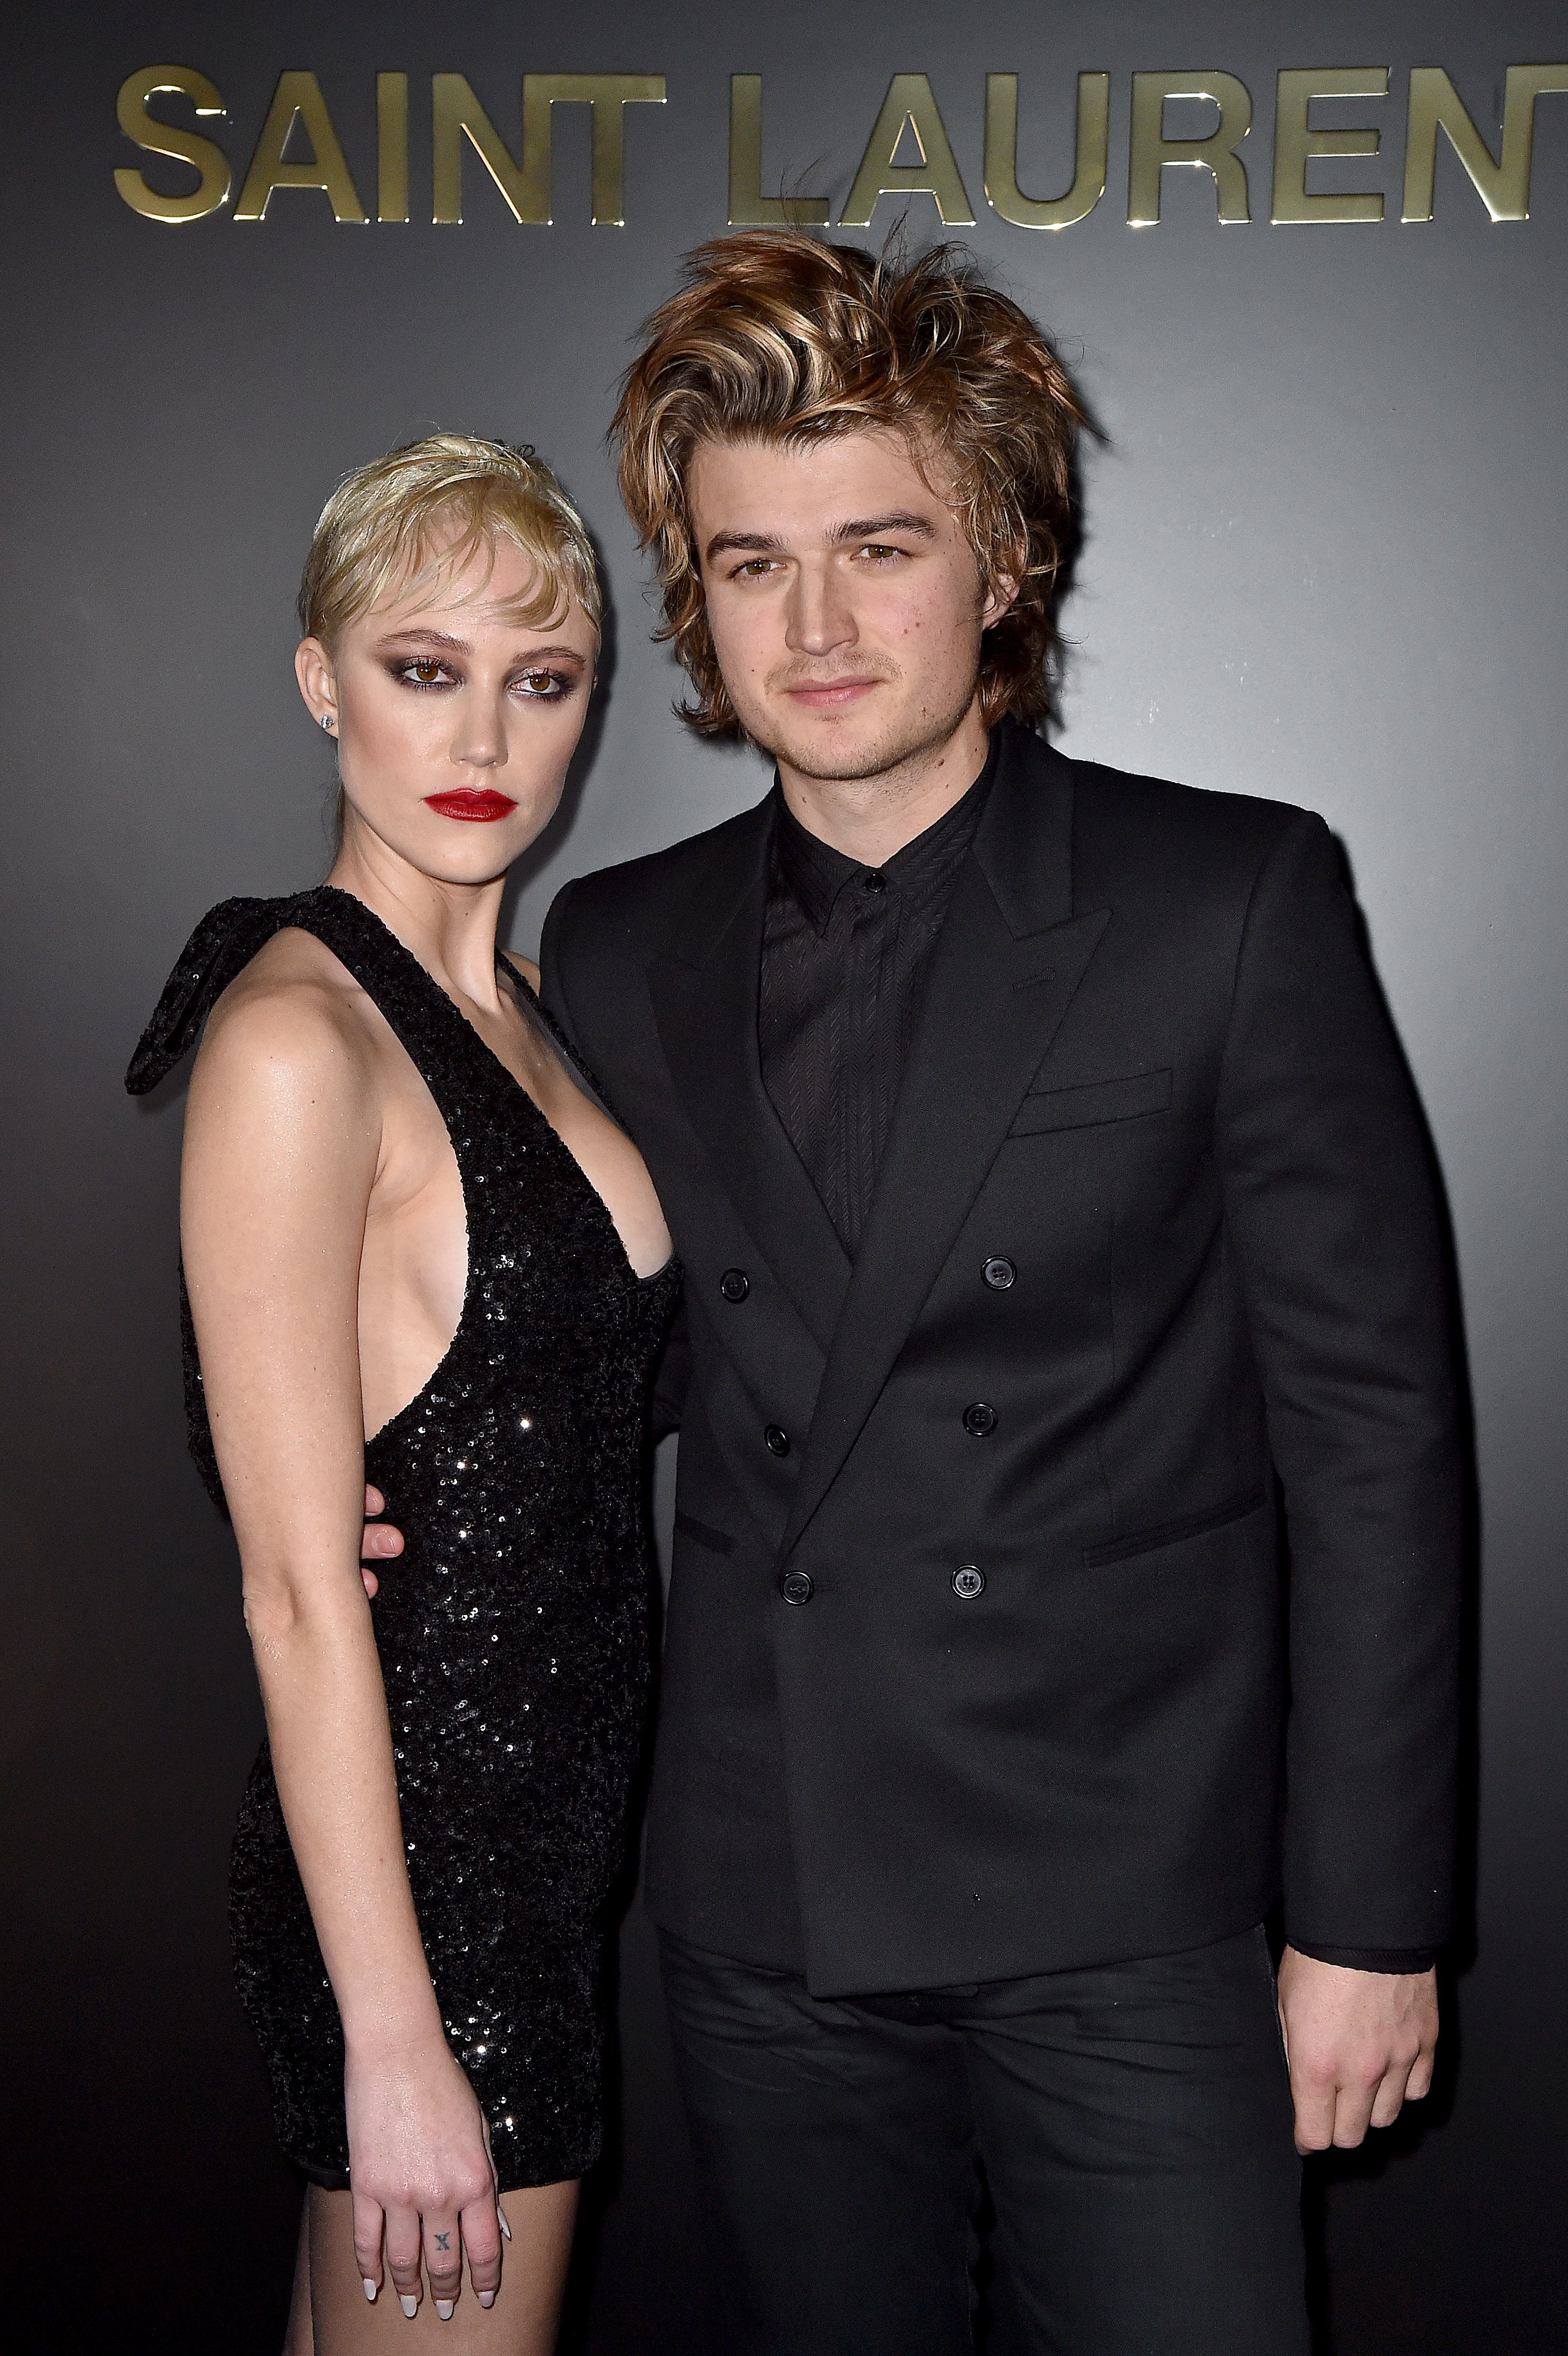 Joe Keery and Maika Monroe attend the Saint Laurent show of the Paris Fashion Week on February 25, 2020, in Paris, France. | Source: Getty Images